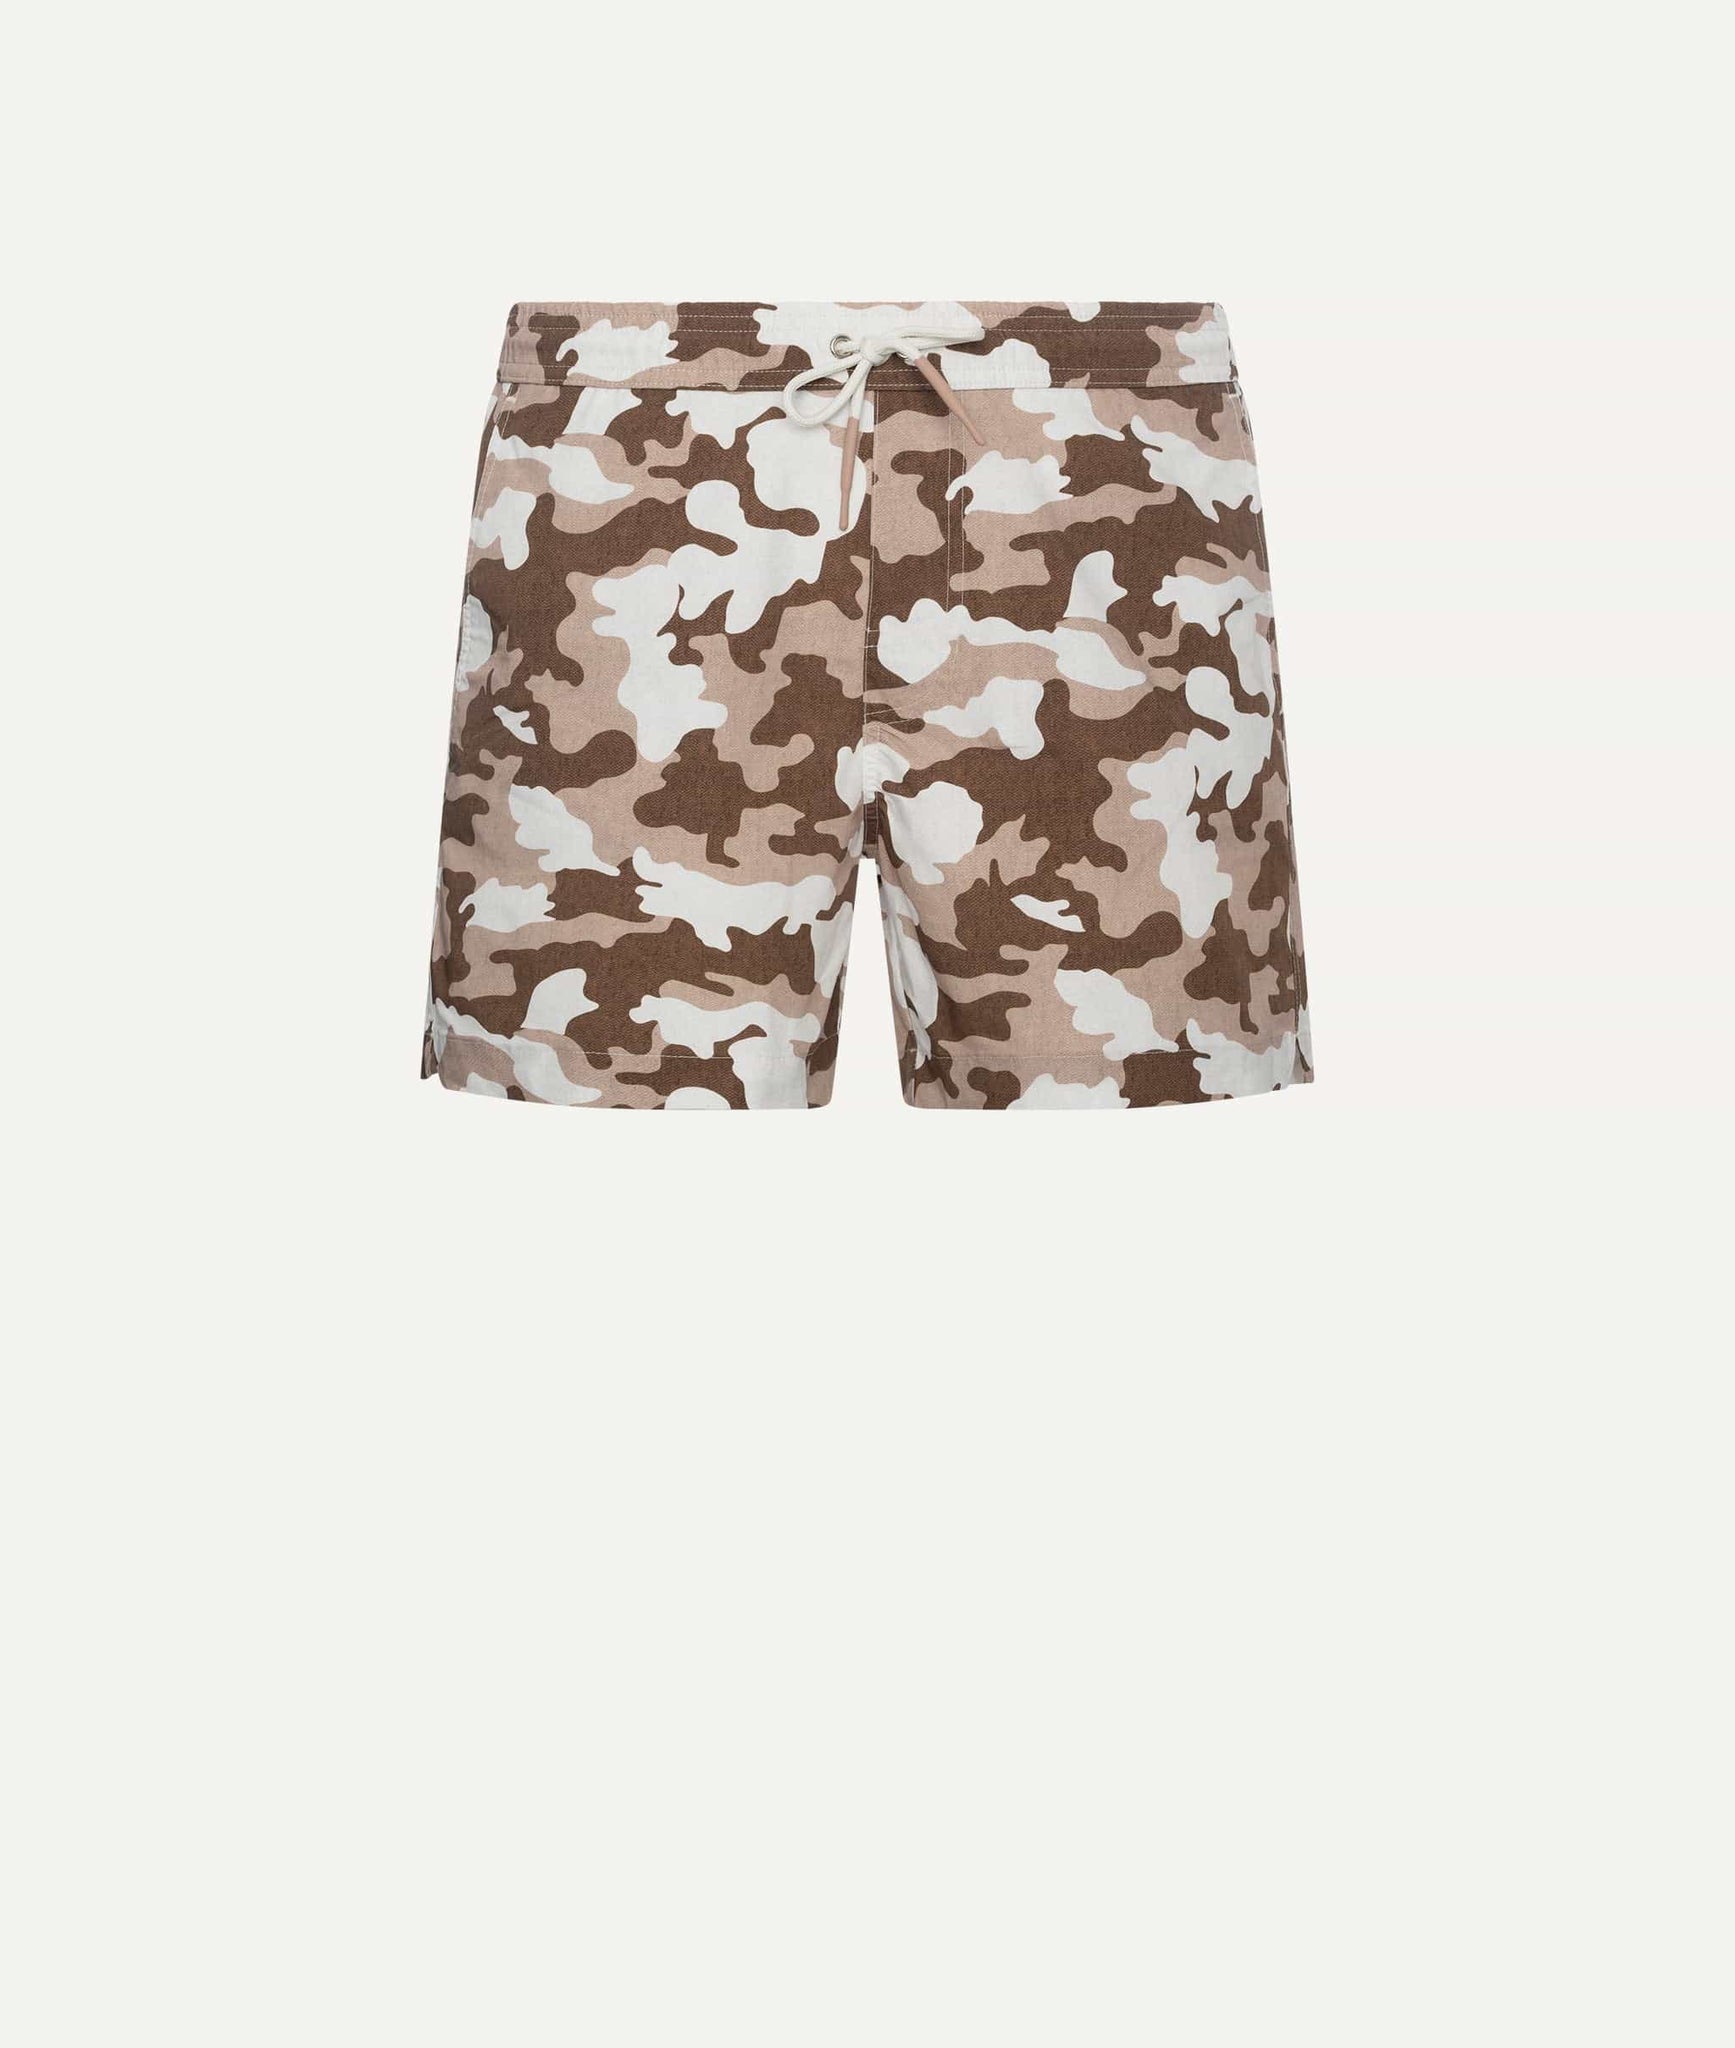 Eleventy - Swimming Suit with Camo Pattern in Polyester